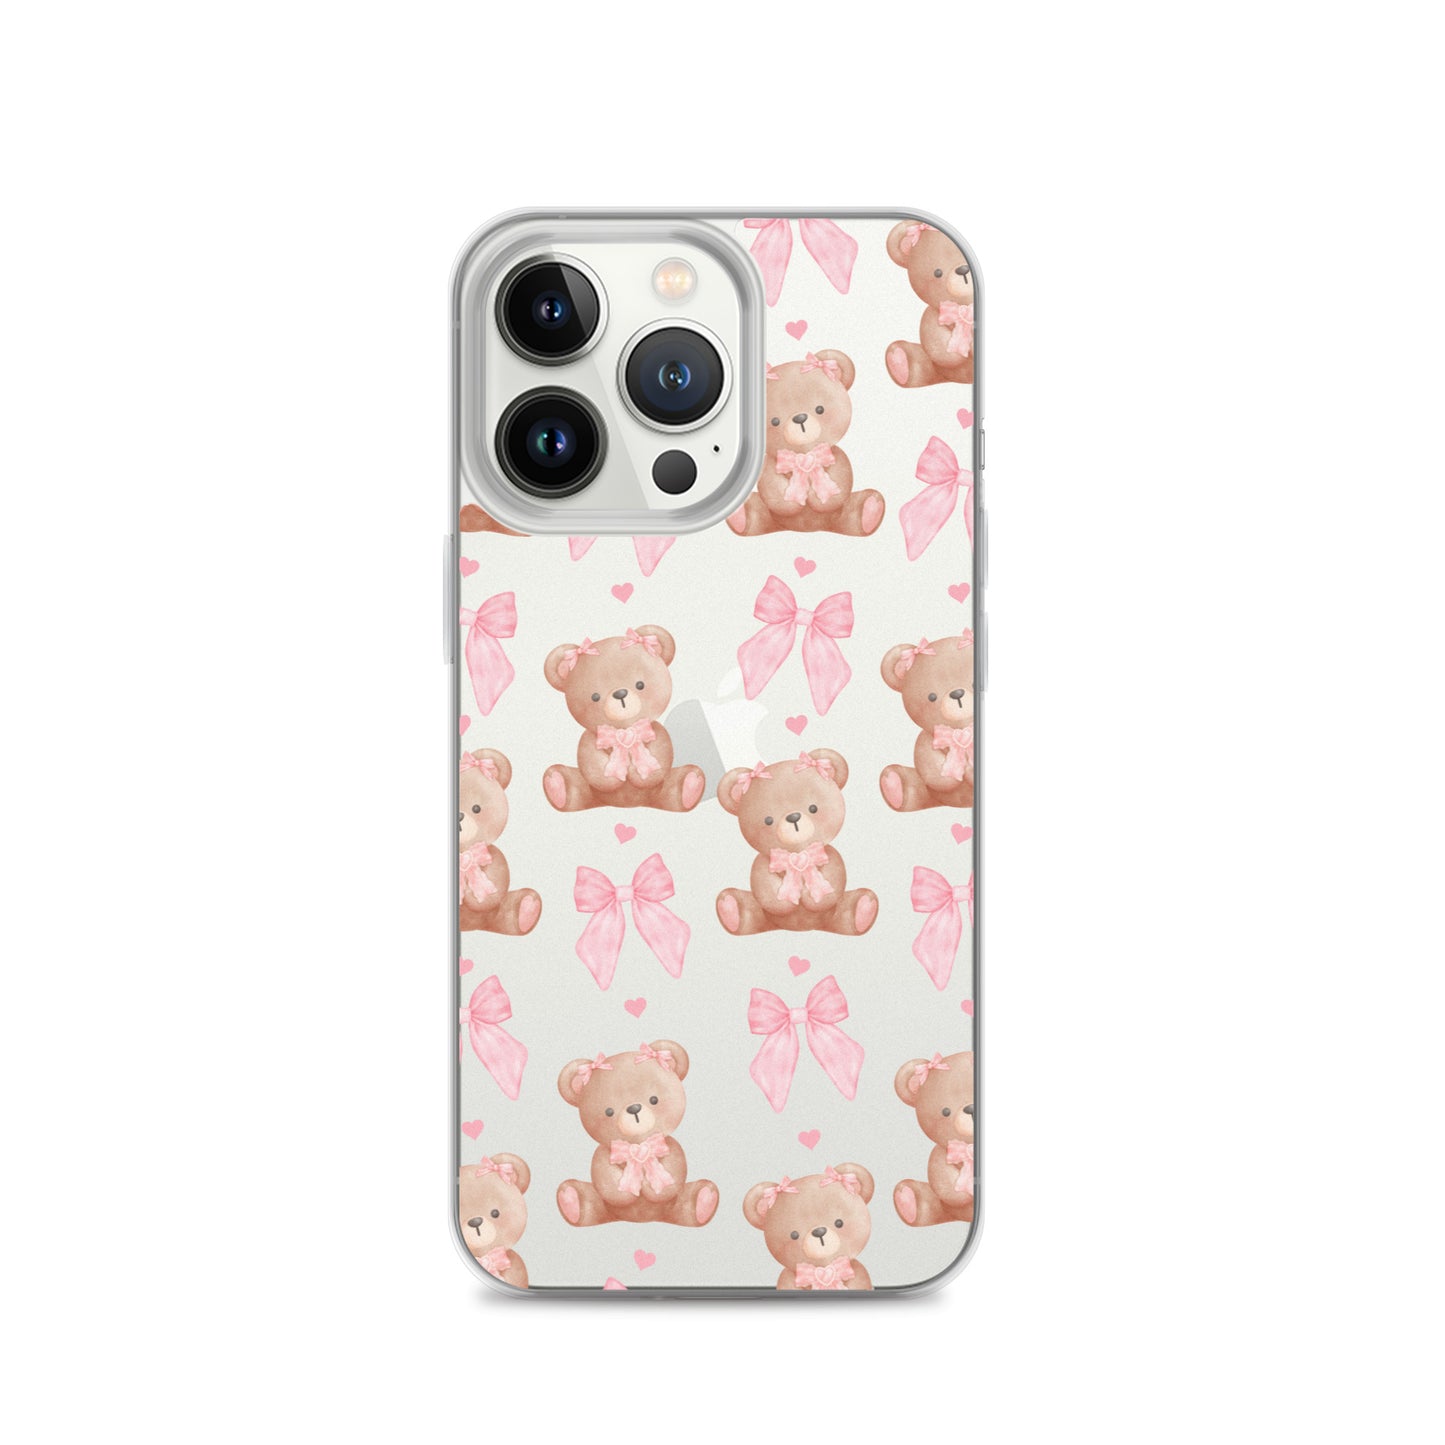 Bows & Bears Clear iPhone Case